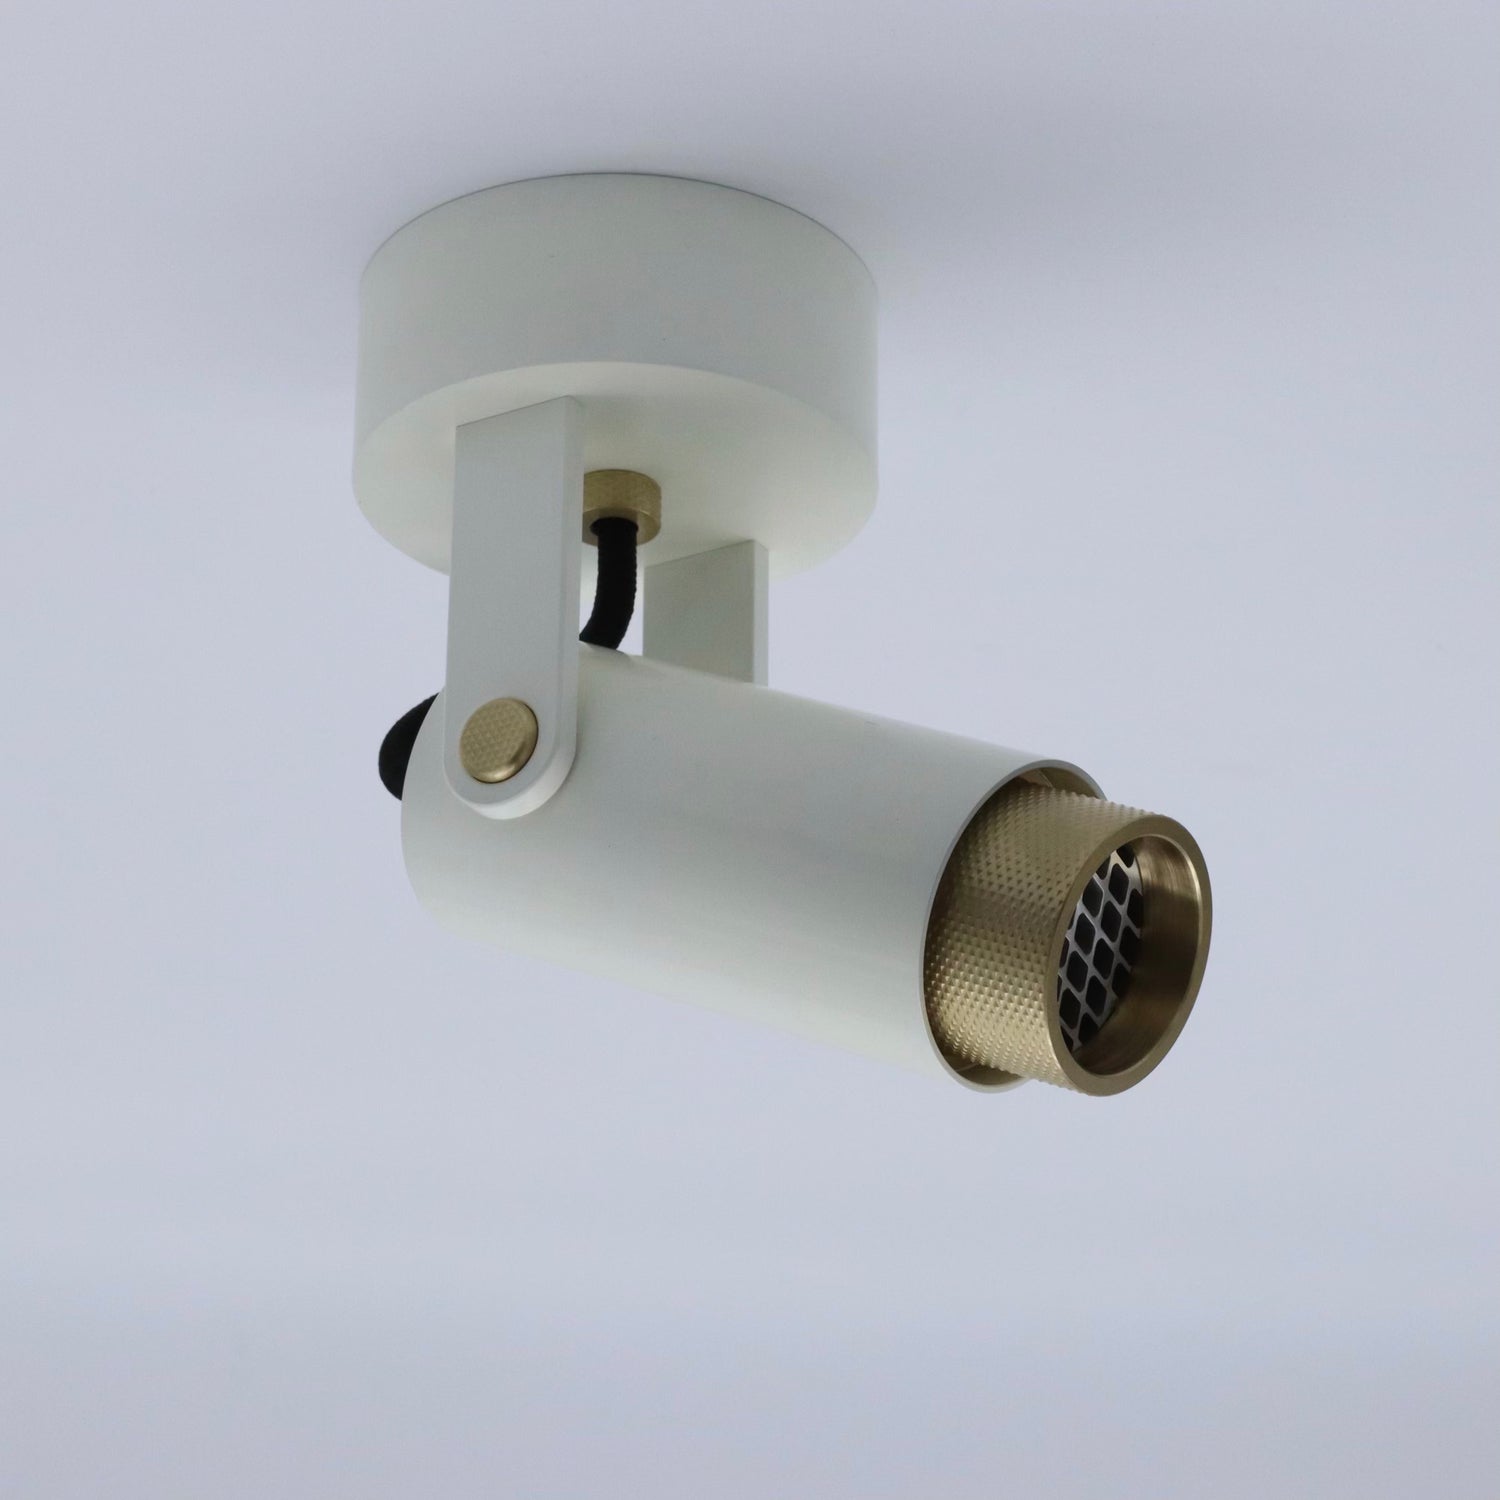 ceramic white cerakote finished down facing spot light with solid brass knurling features. ceiling adjustments 